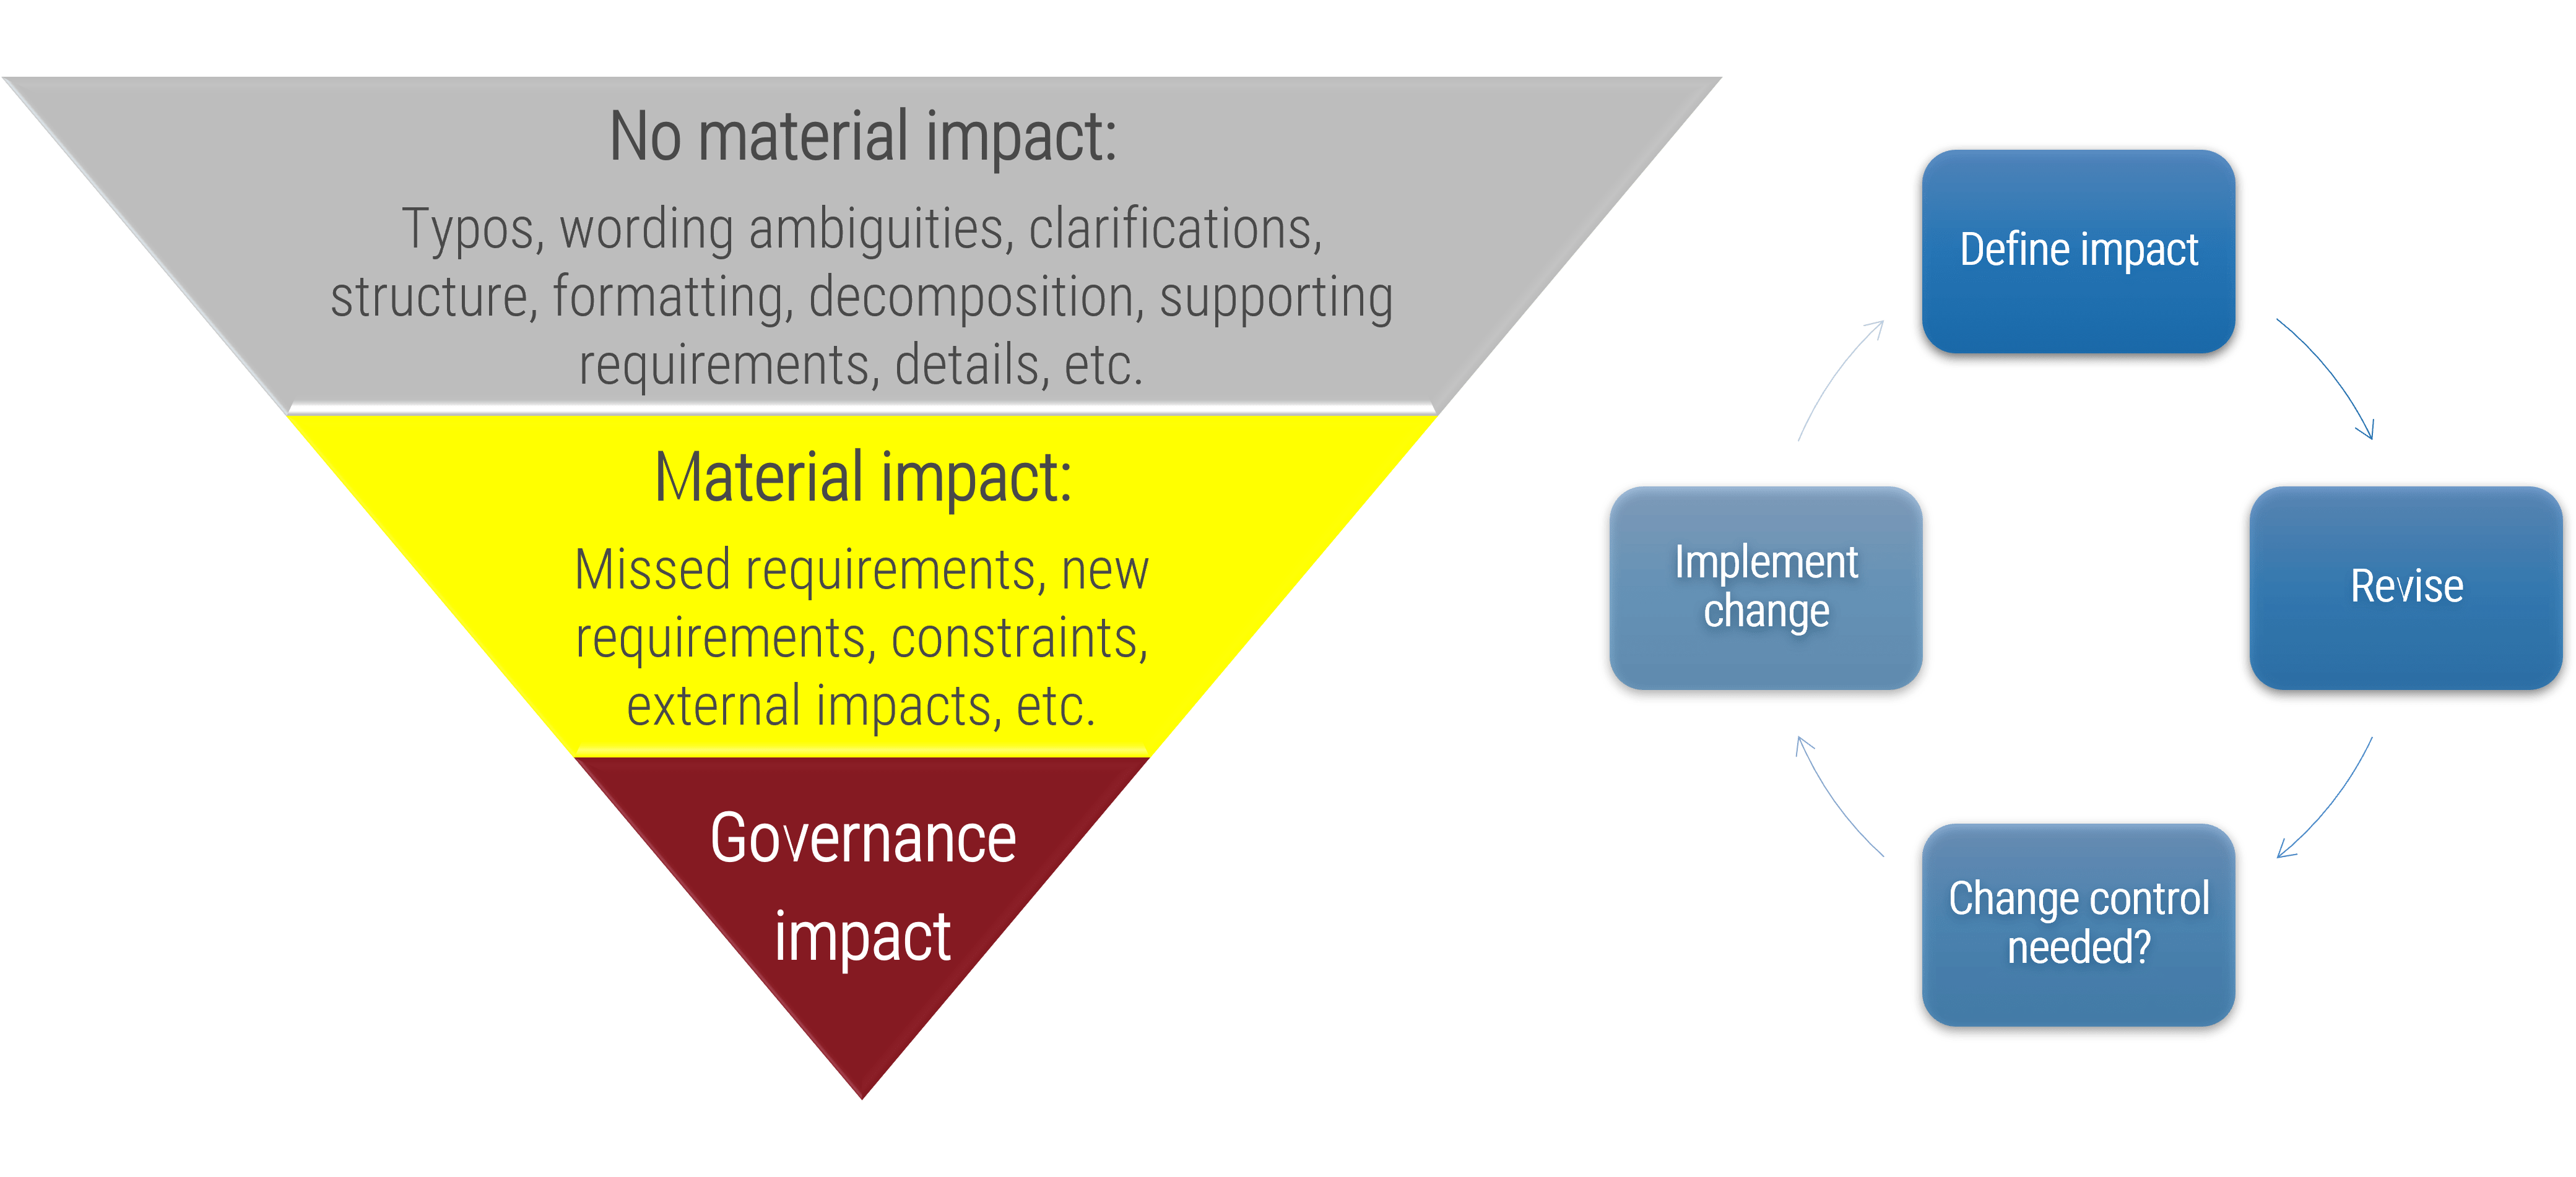 An image of an inverted triangle, with the top being labeled: No Material Impact, the middle being labeled: Material impact; and the bottom being labeled: Governance Impact. To the right of the image, is a cycle including the following terms: Define impact; Revise; Change control needed?; Implement change.